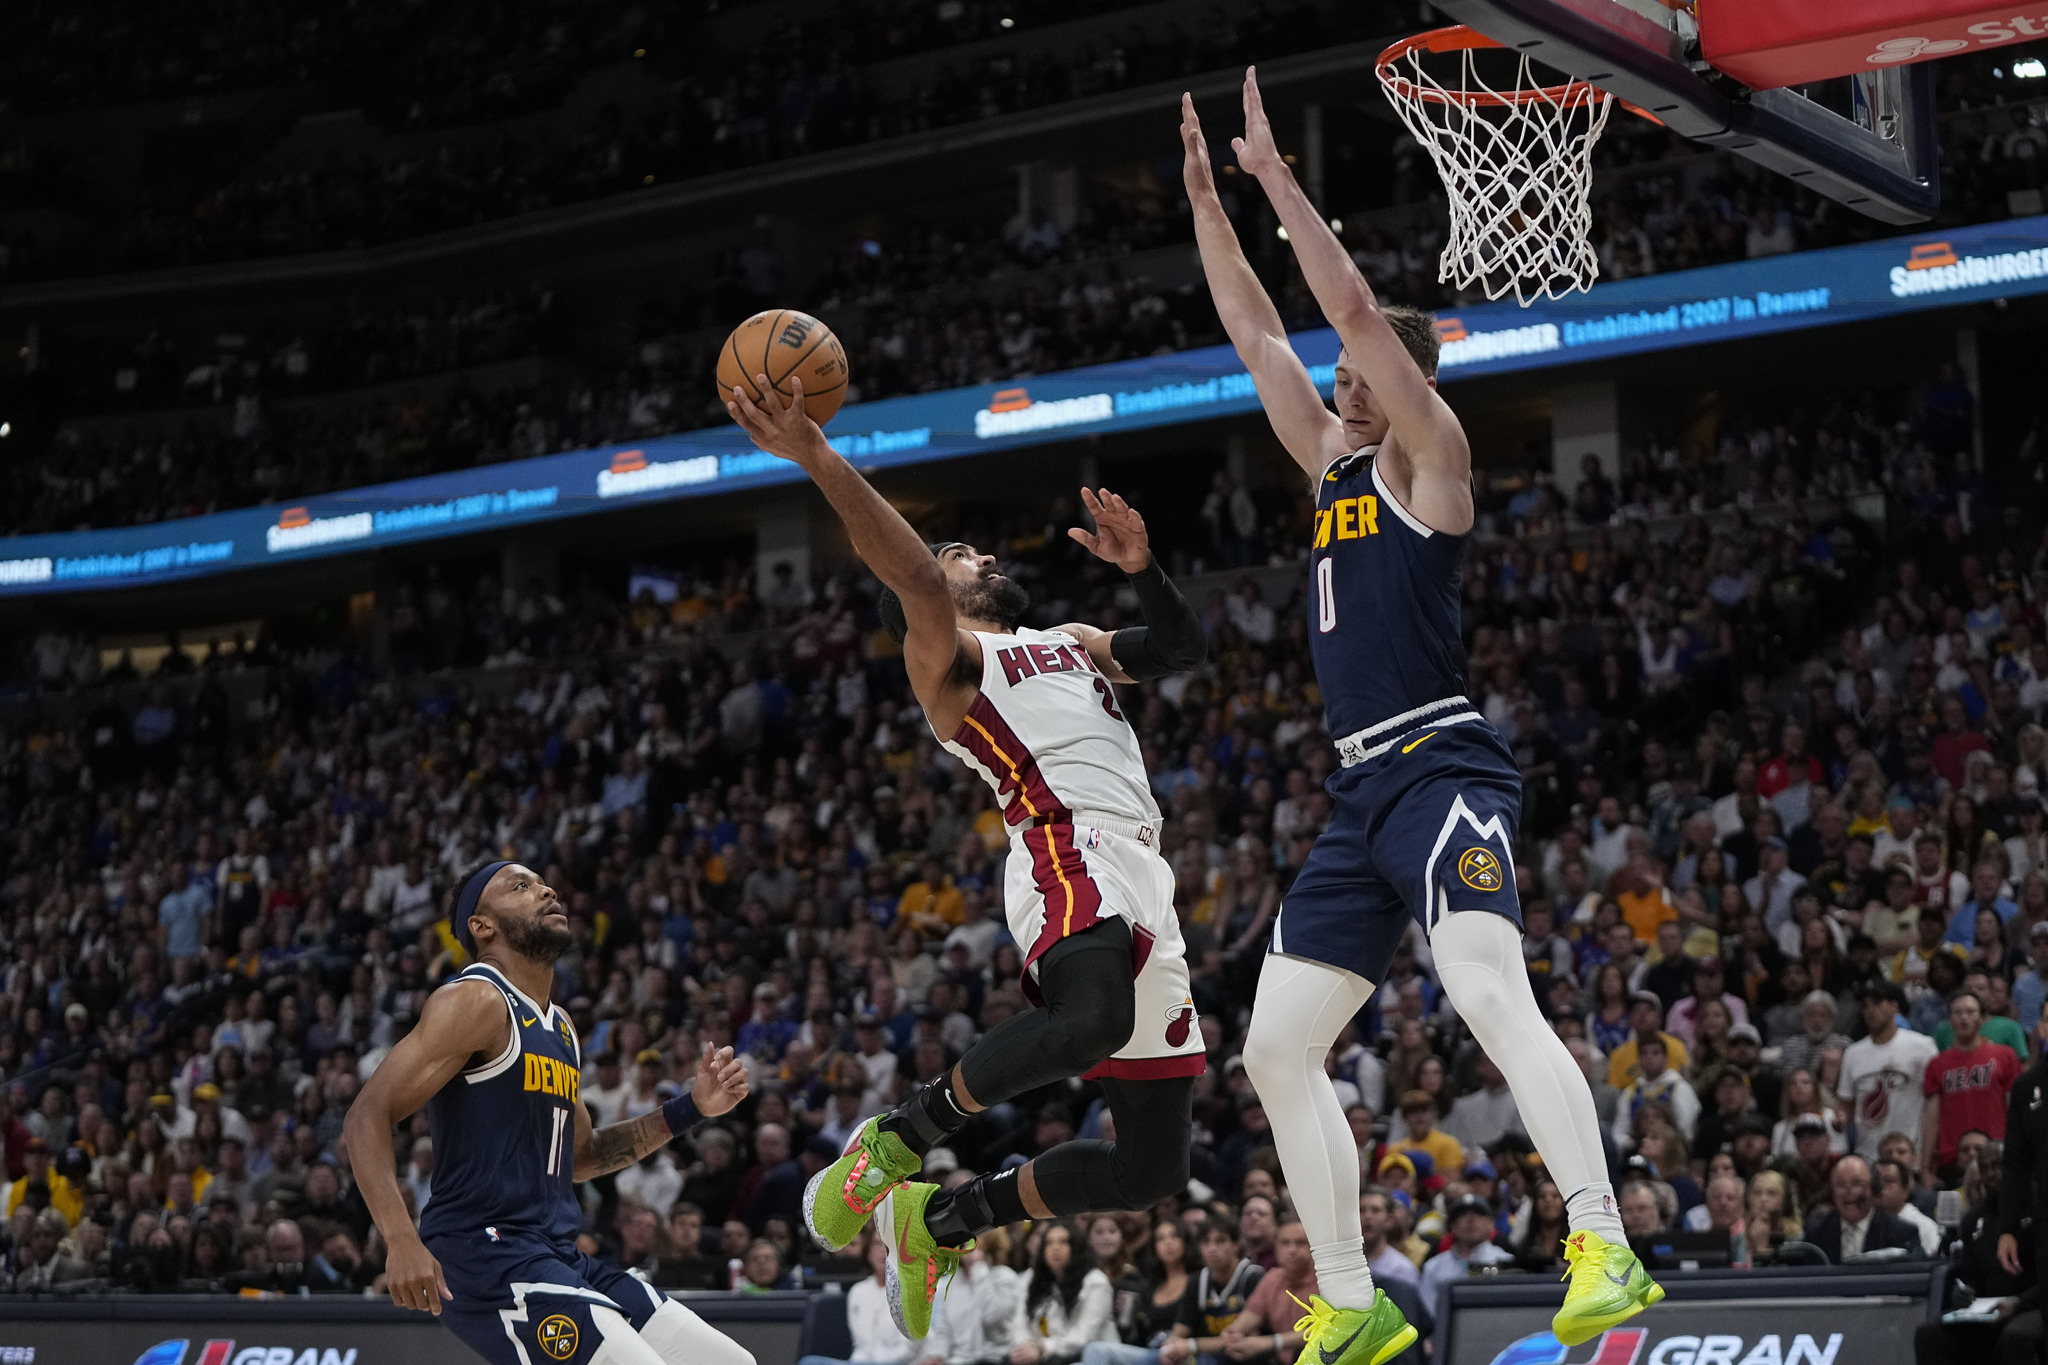 Miami Heat guard Gabe Vincent, center, shoots while defended by  lt;HIT gt;Denver lt;/HIT gt; Nuggets guard Christian Braun, right, during the first half of Game 2 of basketball's NBA Finals, Sunday, June 4, 2023, in  lt;HIT gt;Denver lt;/HIT gt;. (AP Photo/Mark J. Terrill)